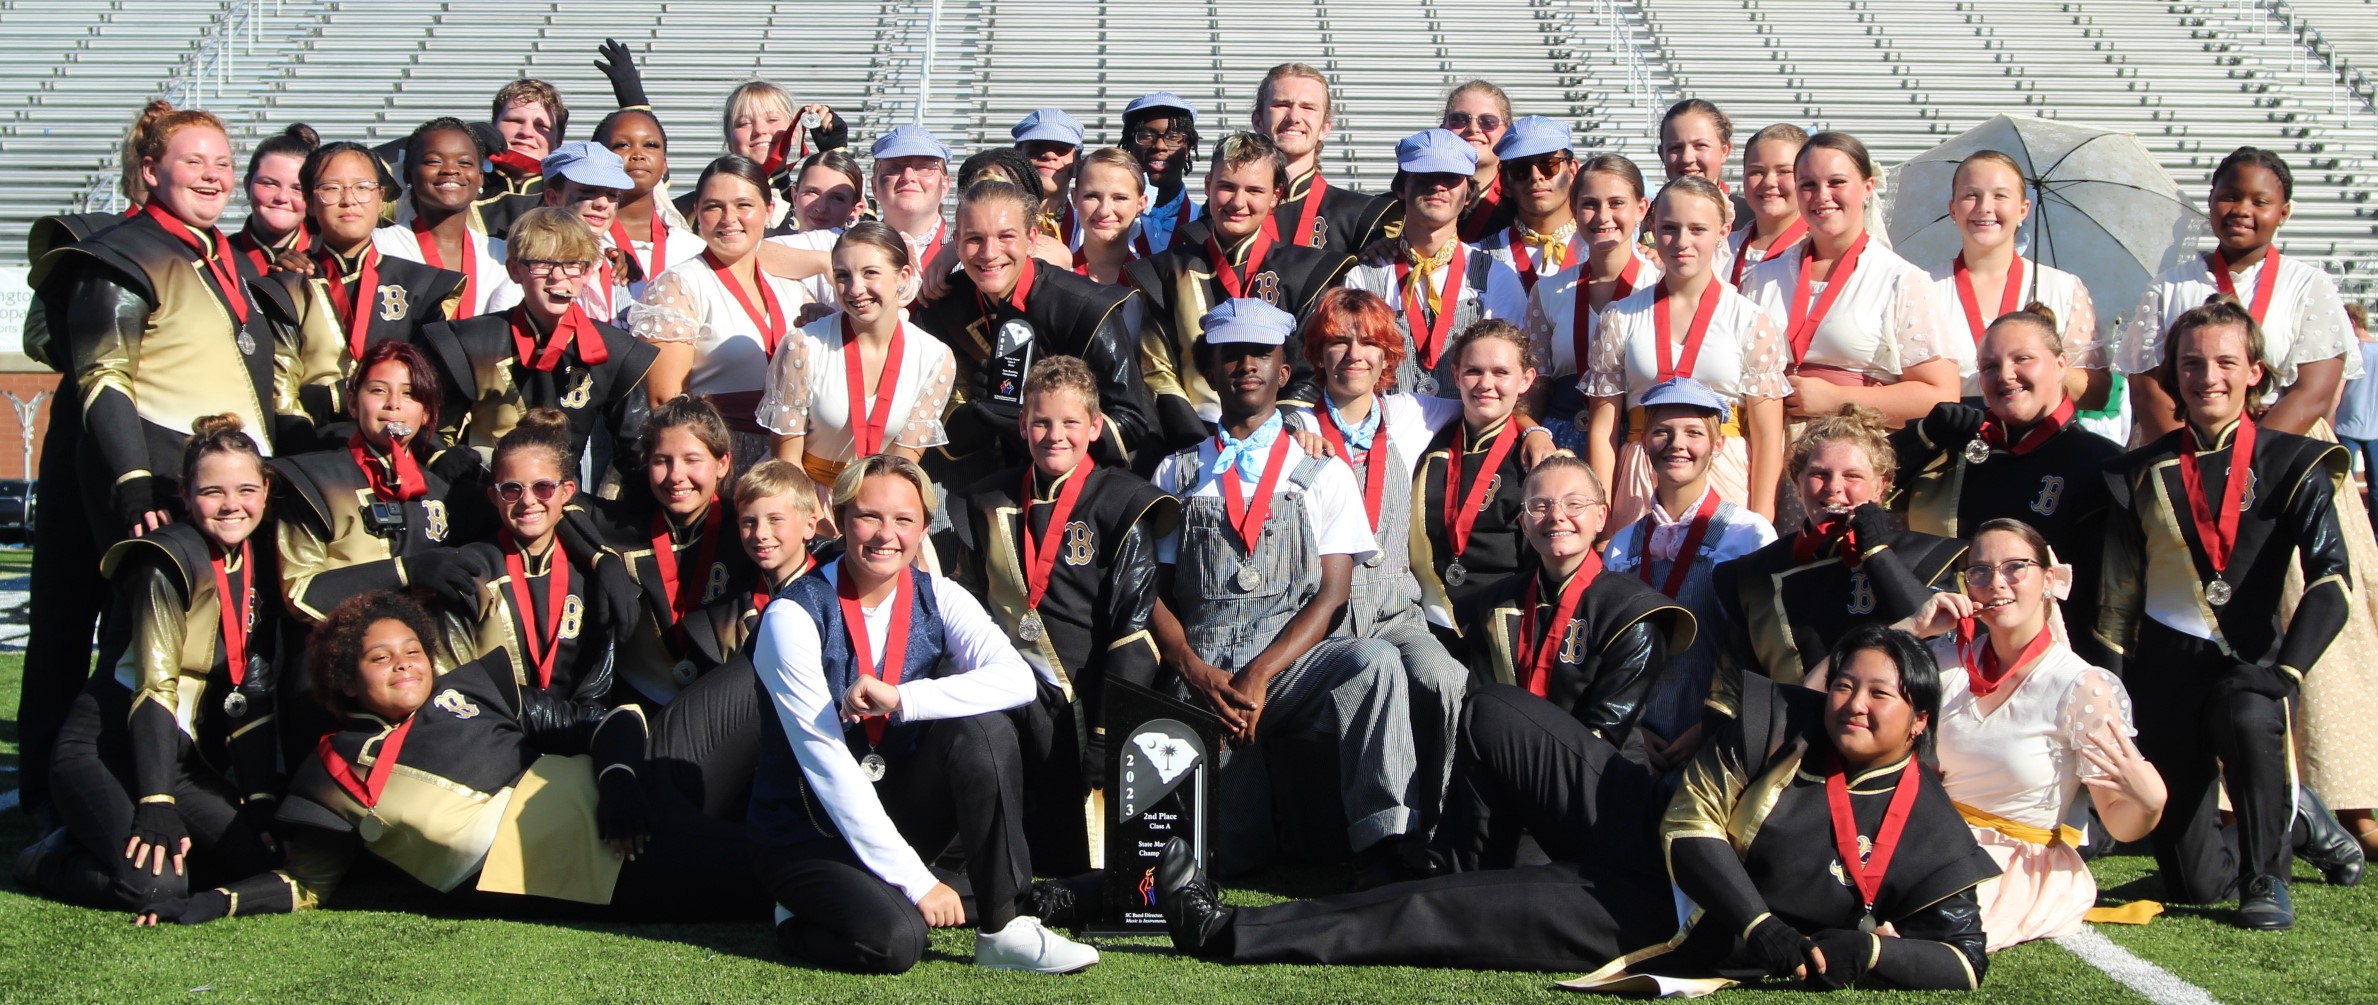 Wildcat Band 2nd place at State